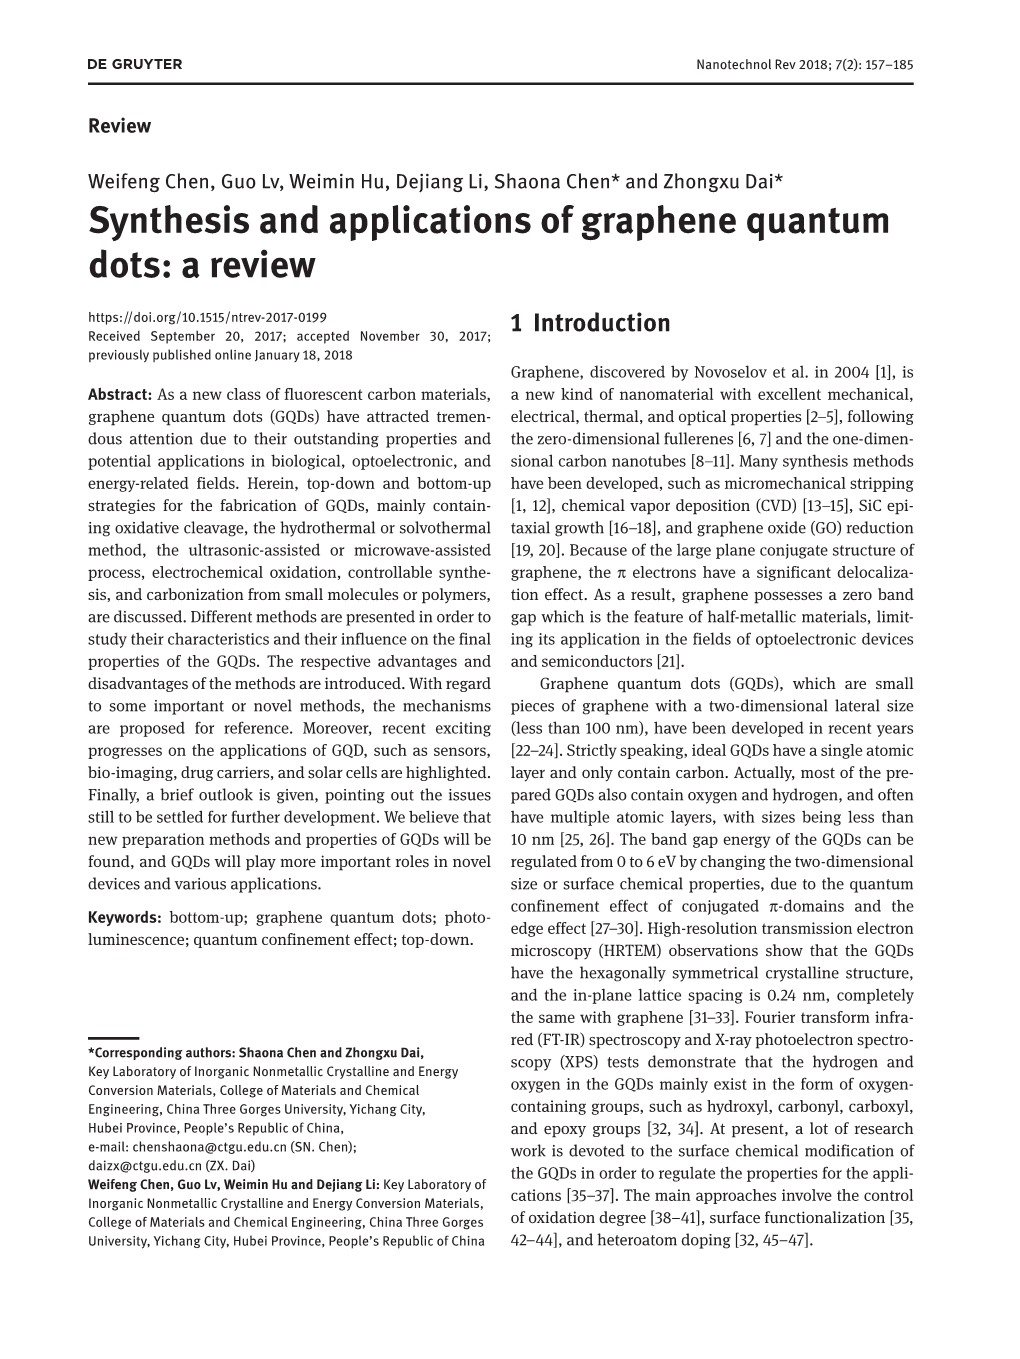 Synthesis and Applications of Graphene Quantum Dots: a Review